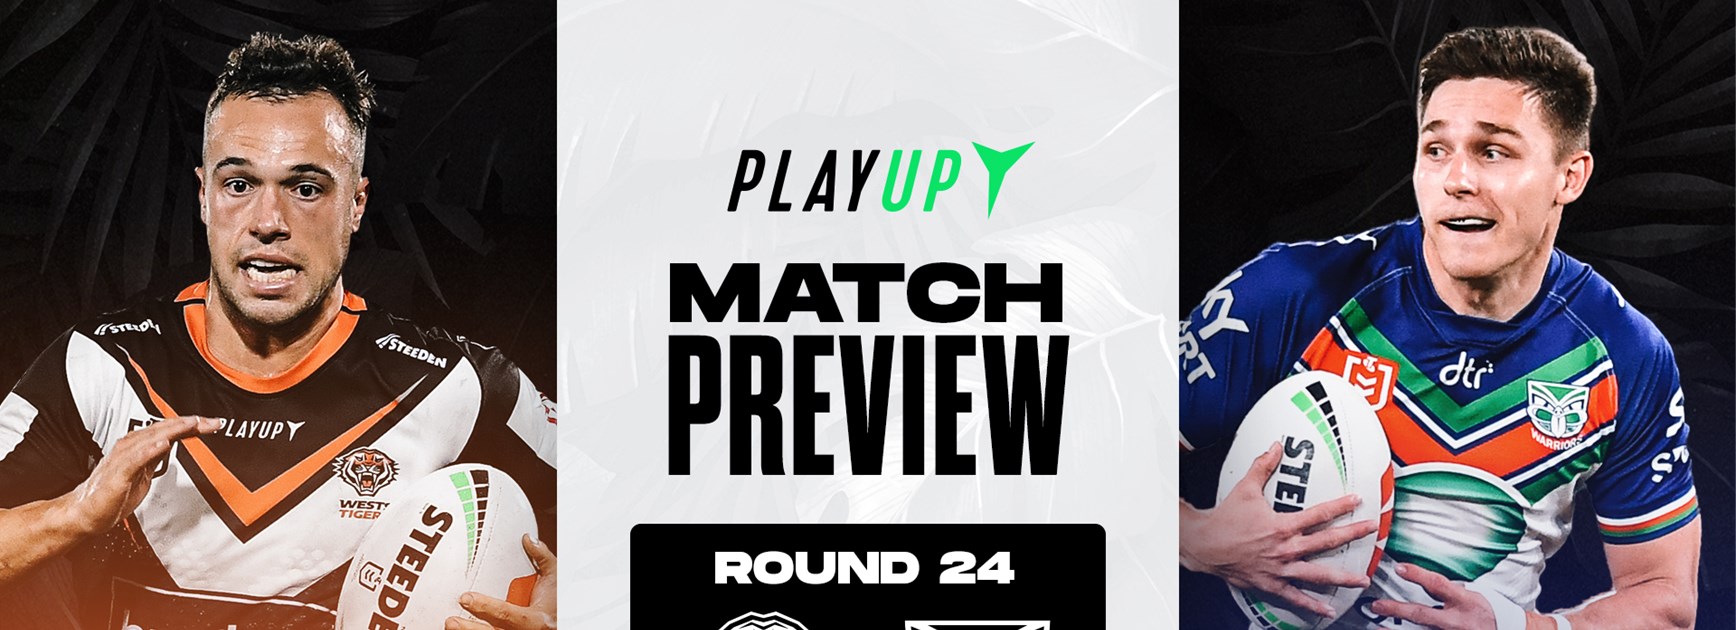 Match Preview: NRL Round 24 vs Warriors